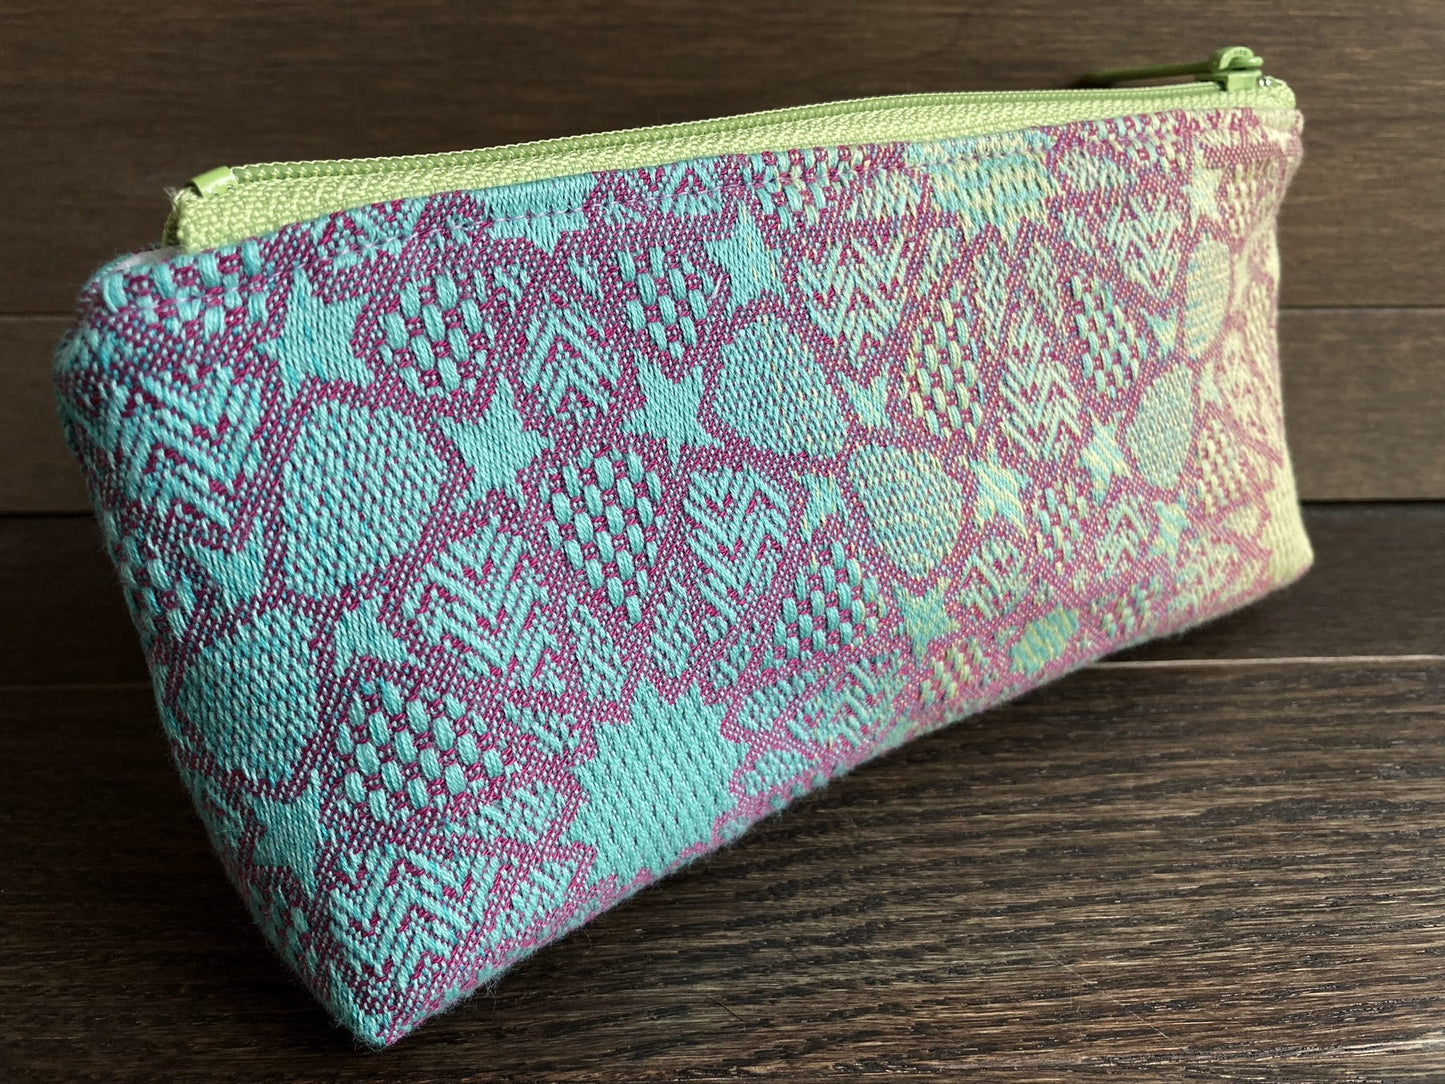 Vibrant Blues, Pinks, and Yellows Jacquard & PUL Lined Compact Zipper Bag